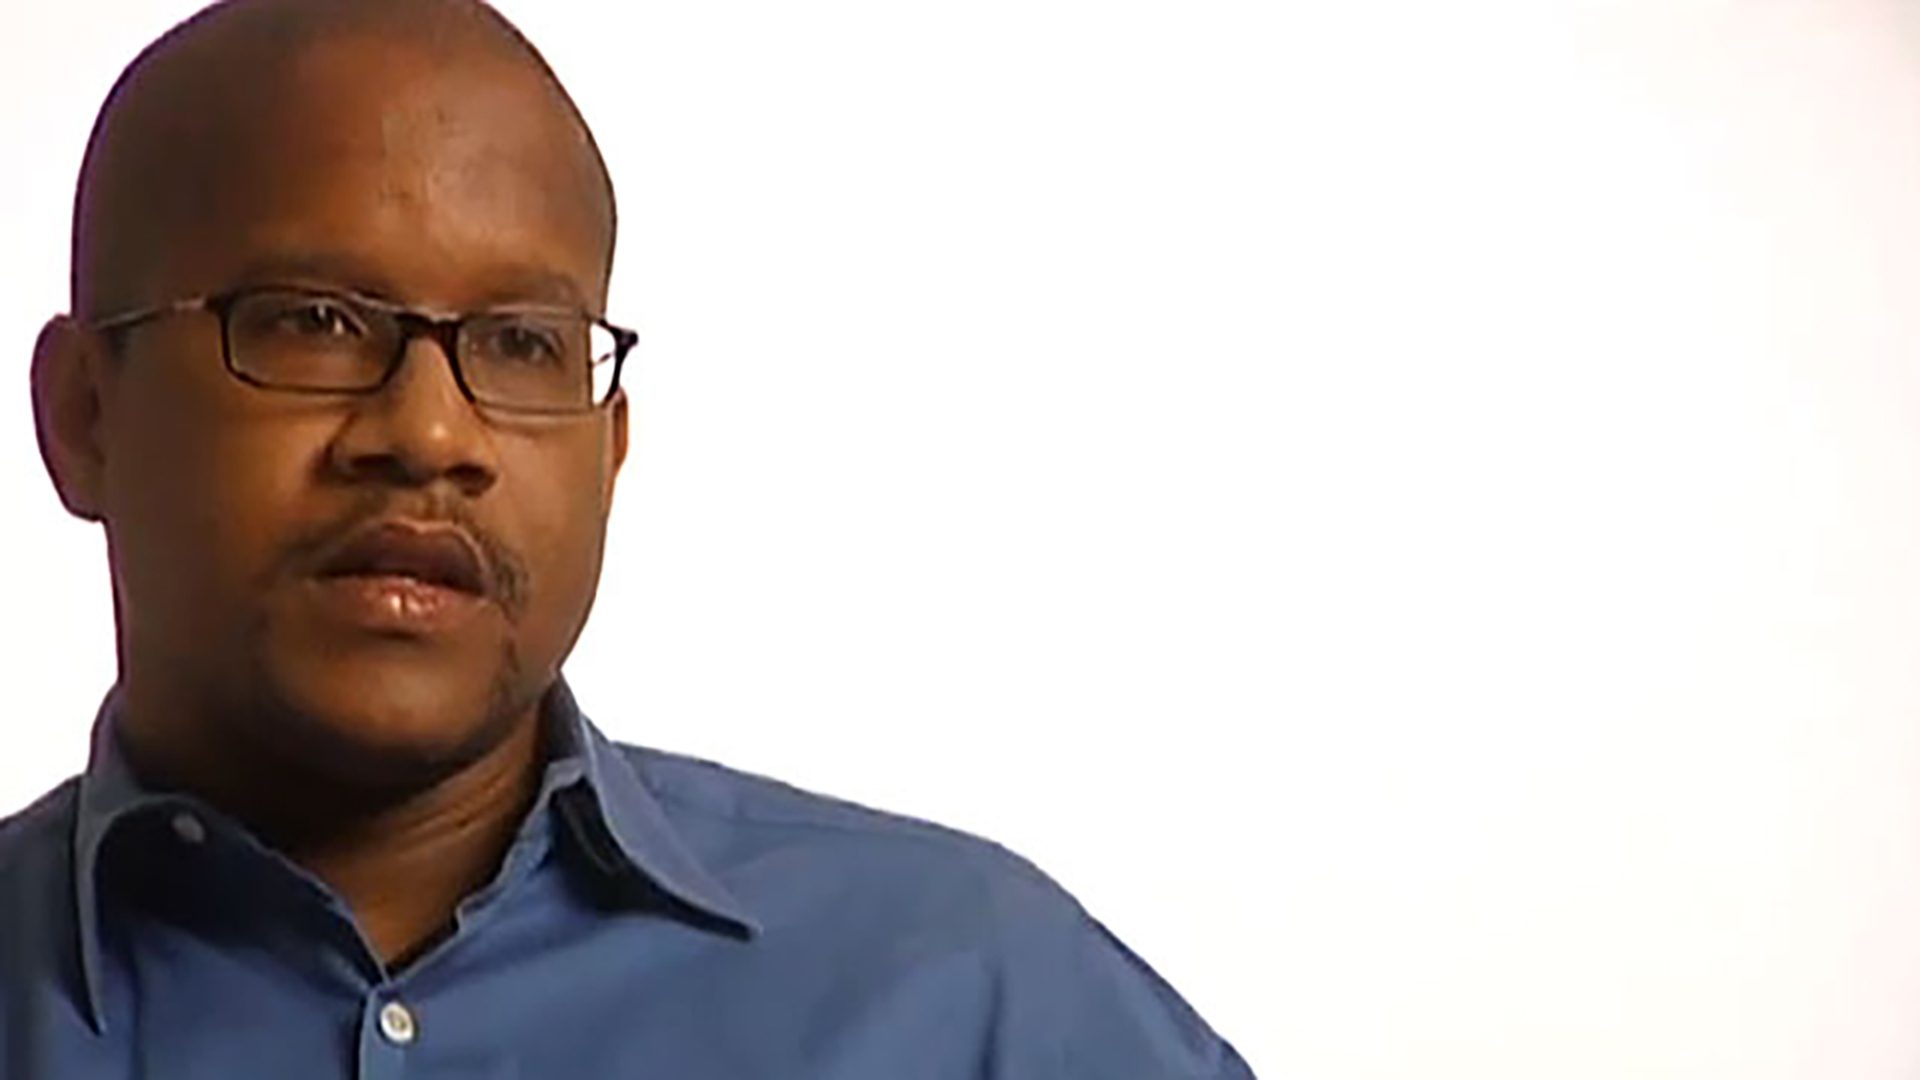 A bald adult man wearing glasses and a blue button-up shirt is interviewed against a white background.